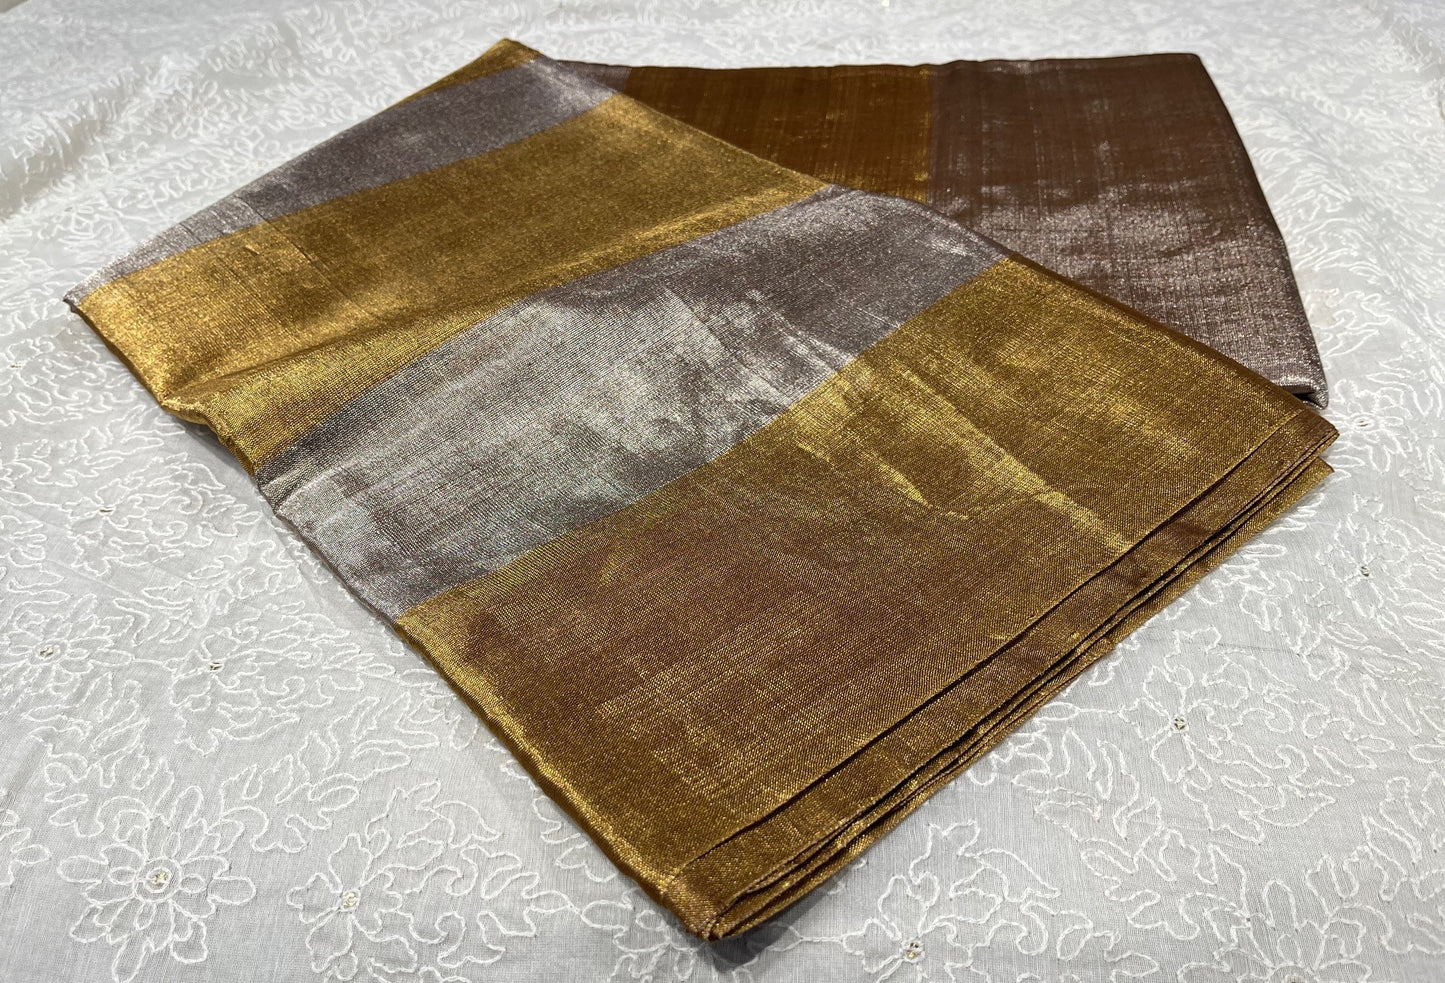 GOLDEN & SILVER STRIPED PURE CHANDERI TISSUE HANDLOOM SAREE WITHOUT BLOUSE